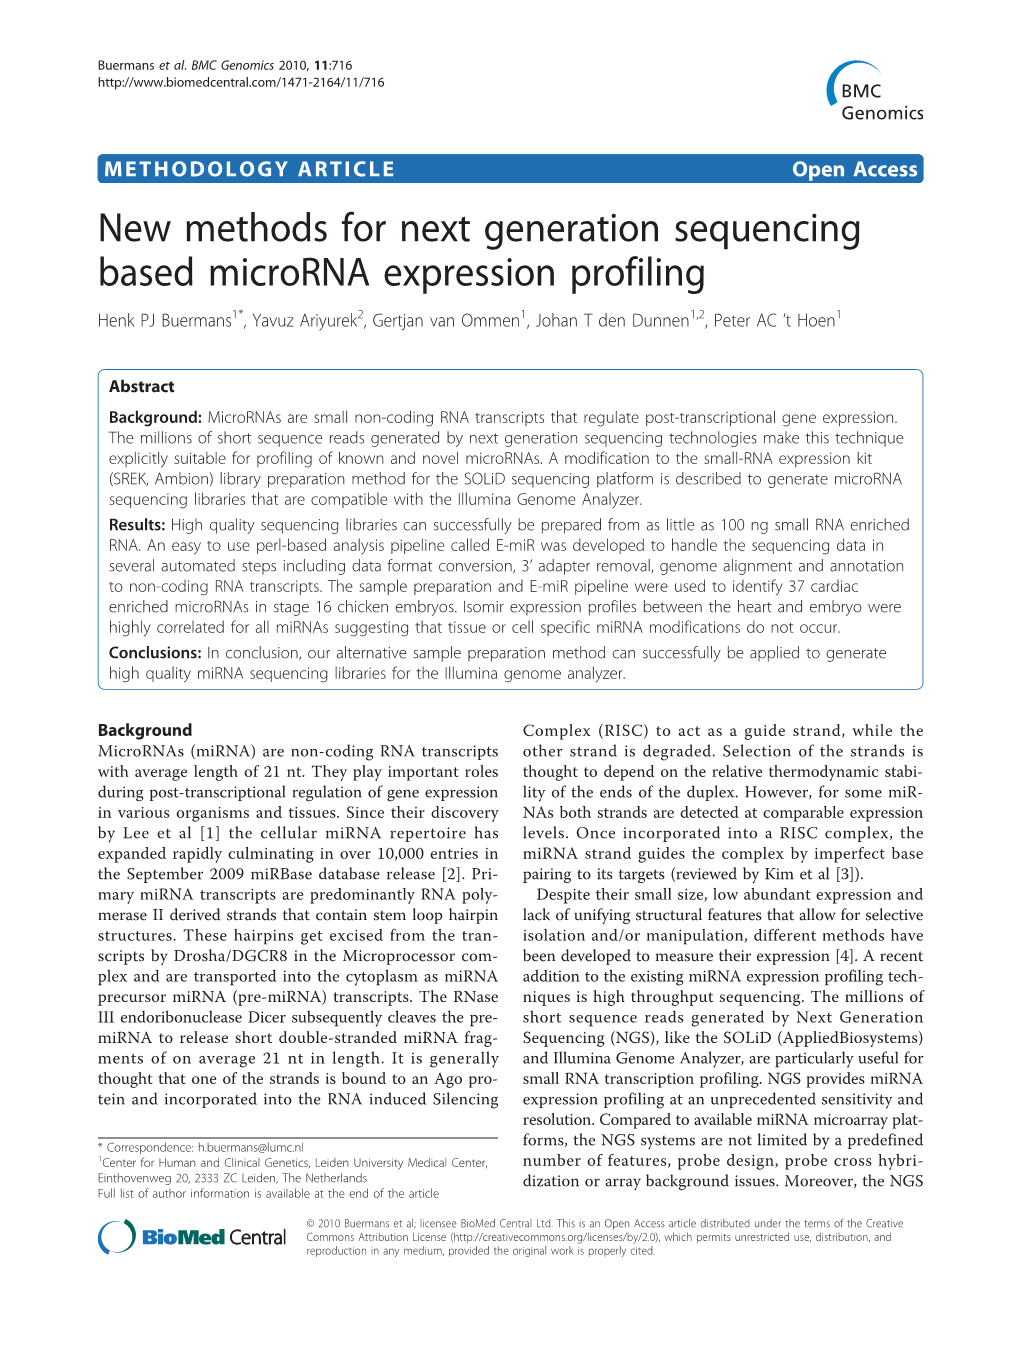 New Methods for Next Generation Sequencing Based Microrna Expression Profiling